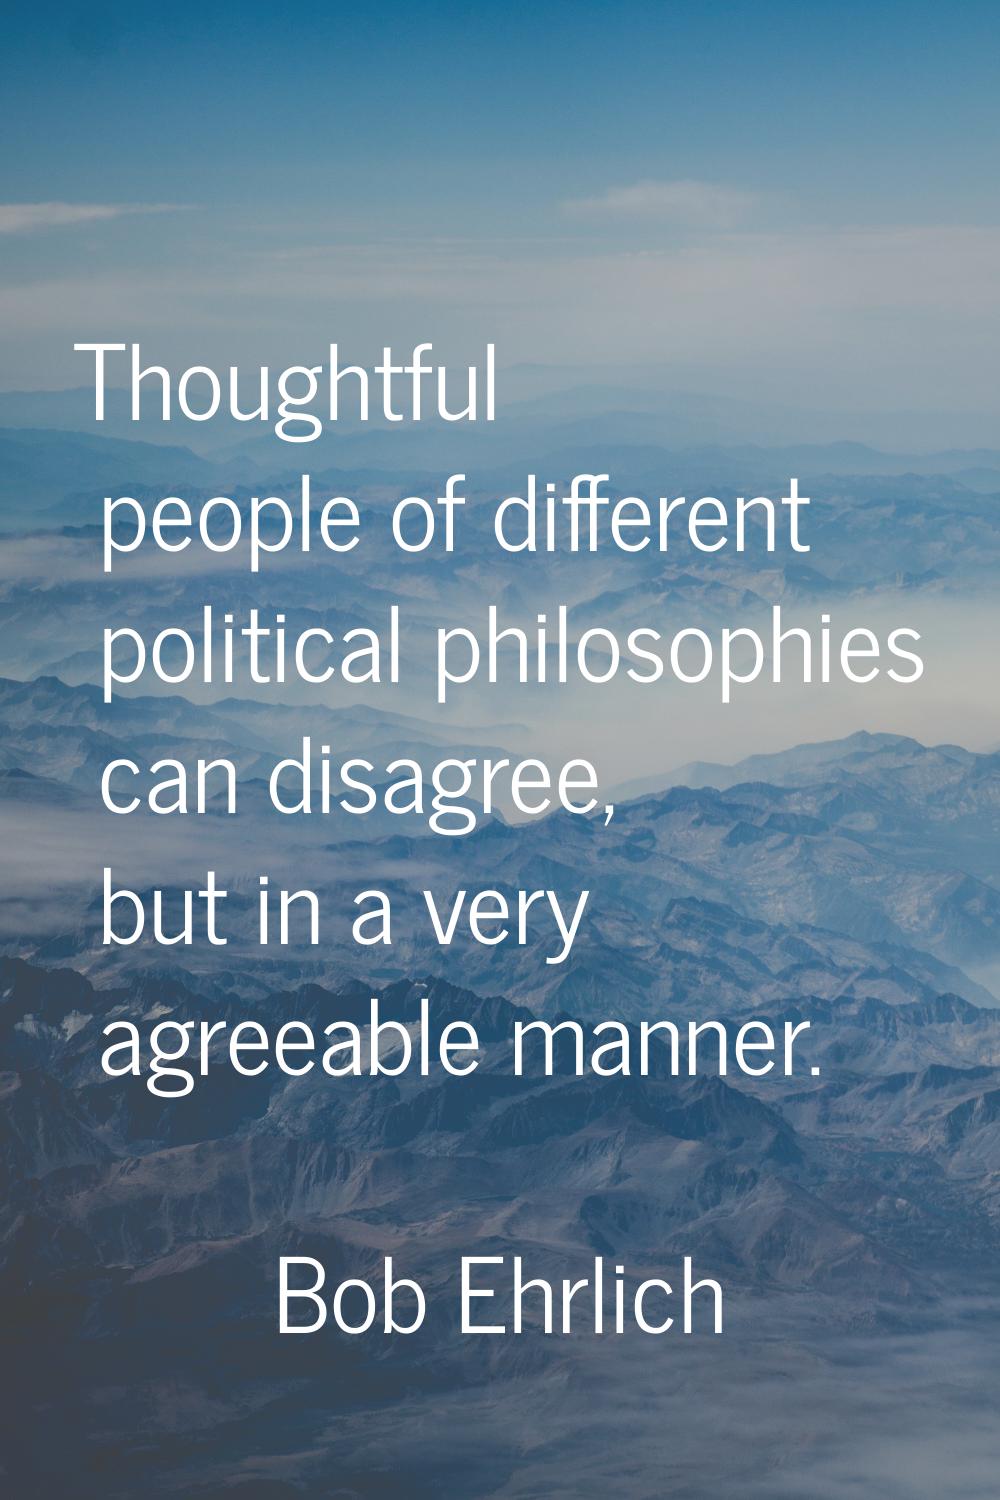 Thoughtful people of different political philosophies can disagree, but in a very agreeable manner.